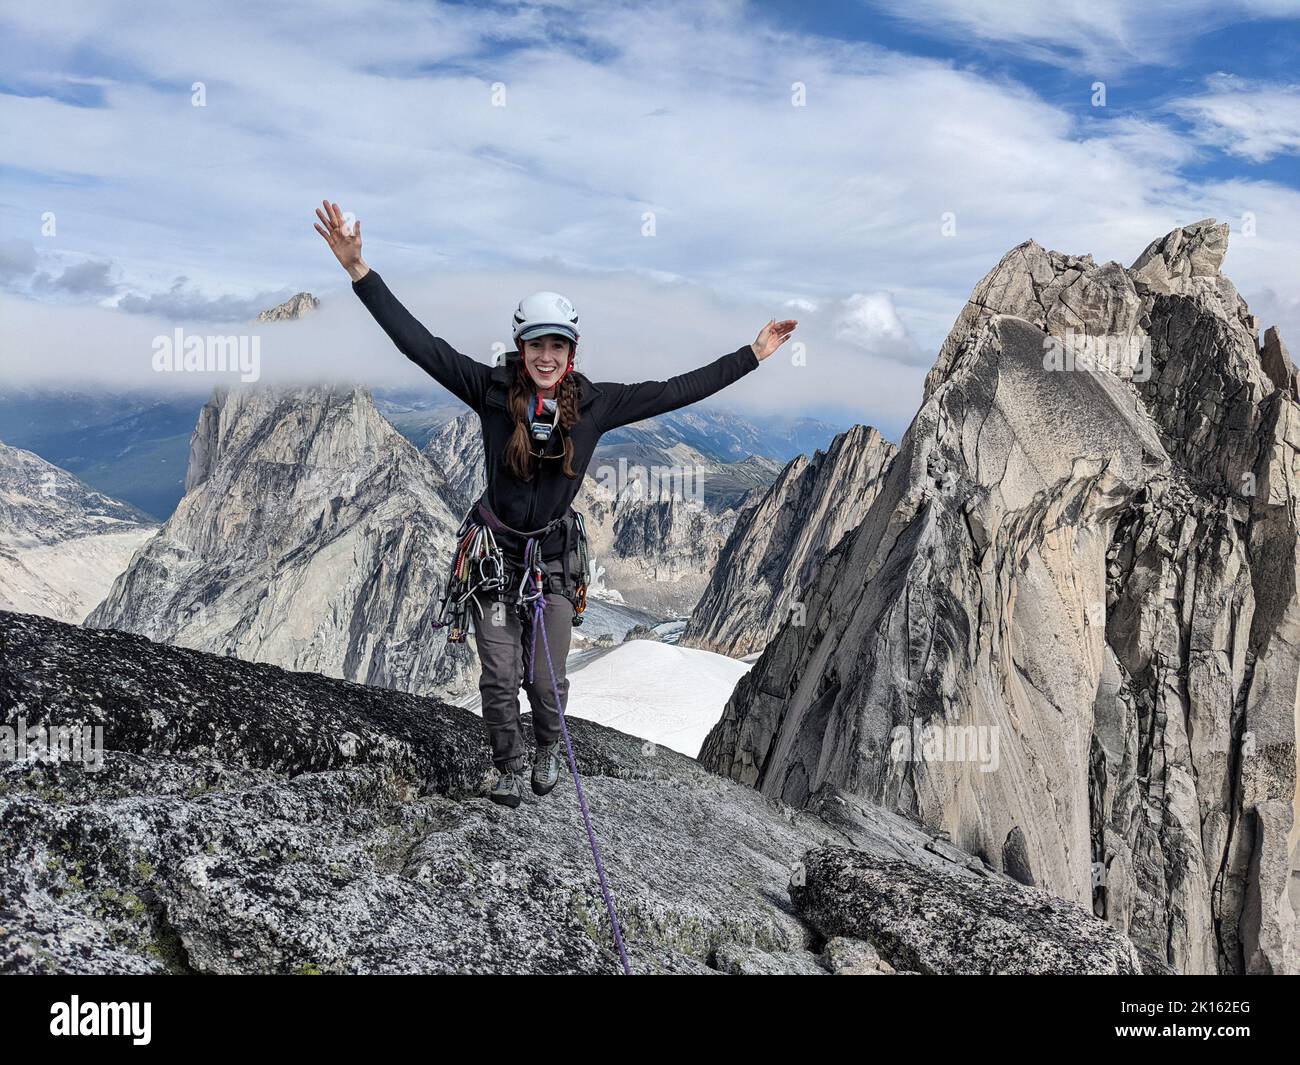 Female Climber Smiling on Summit of Rock Spire Stock Photo